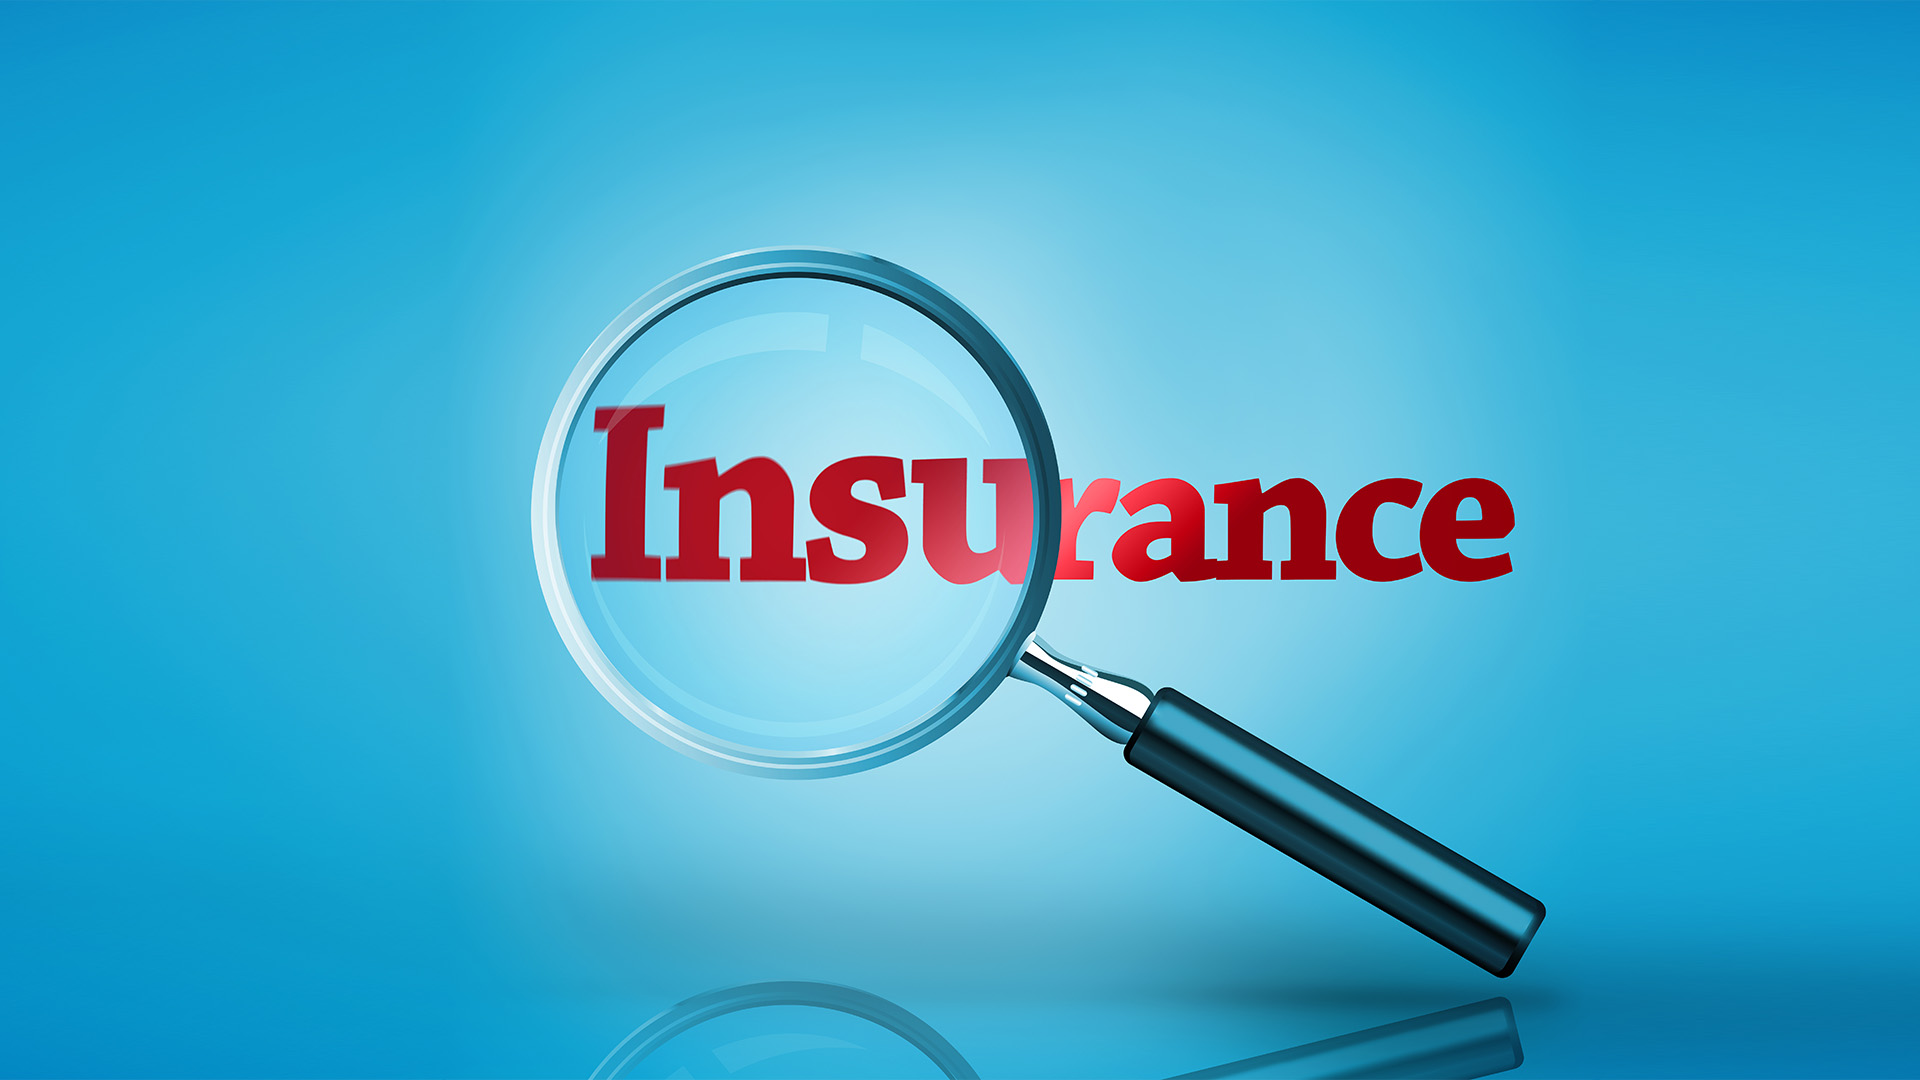 What important things you must know before taking a home insurance?